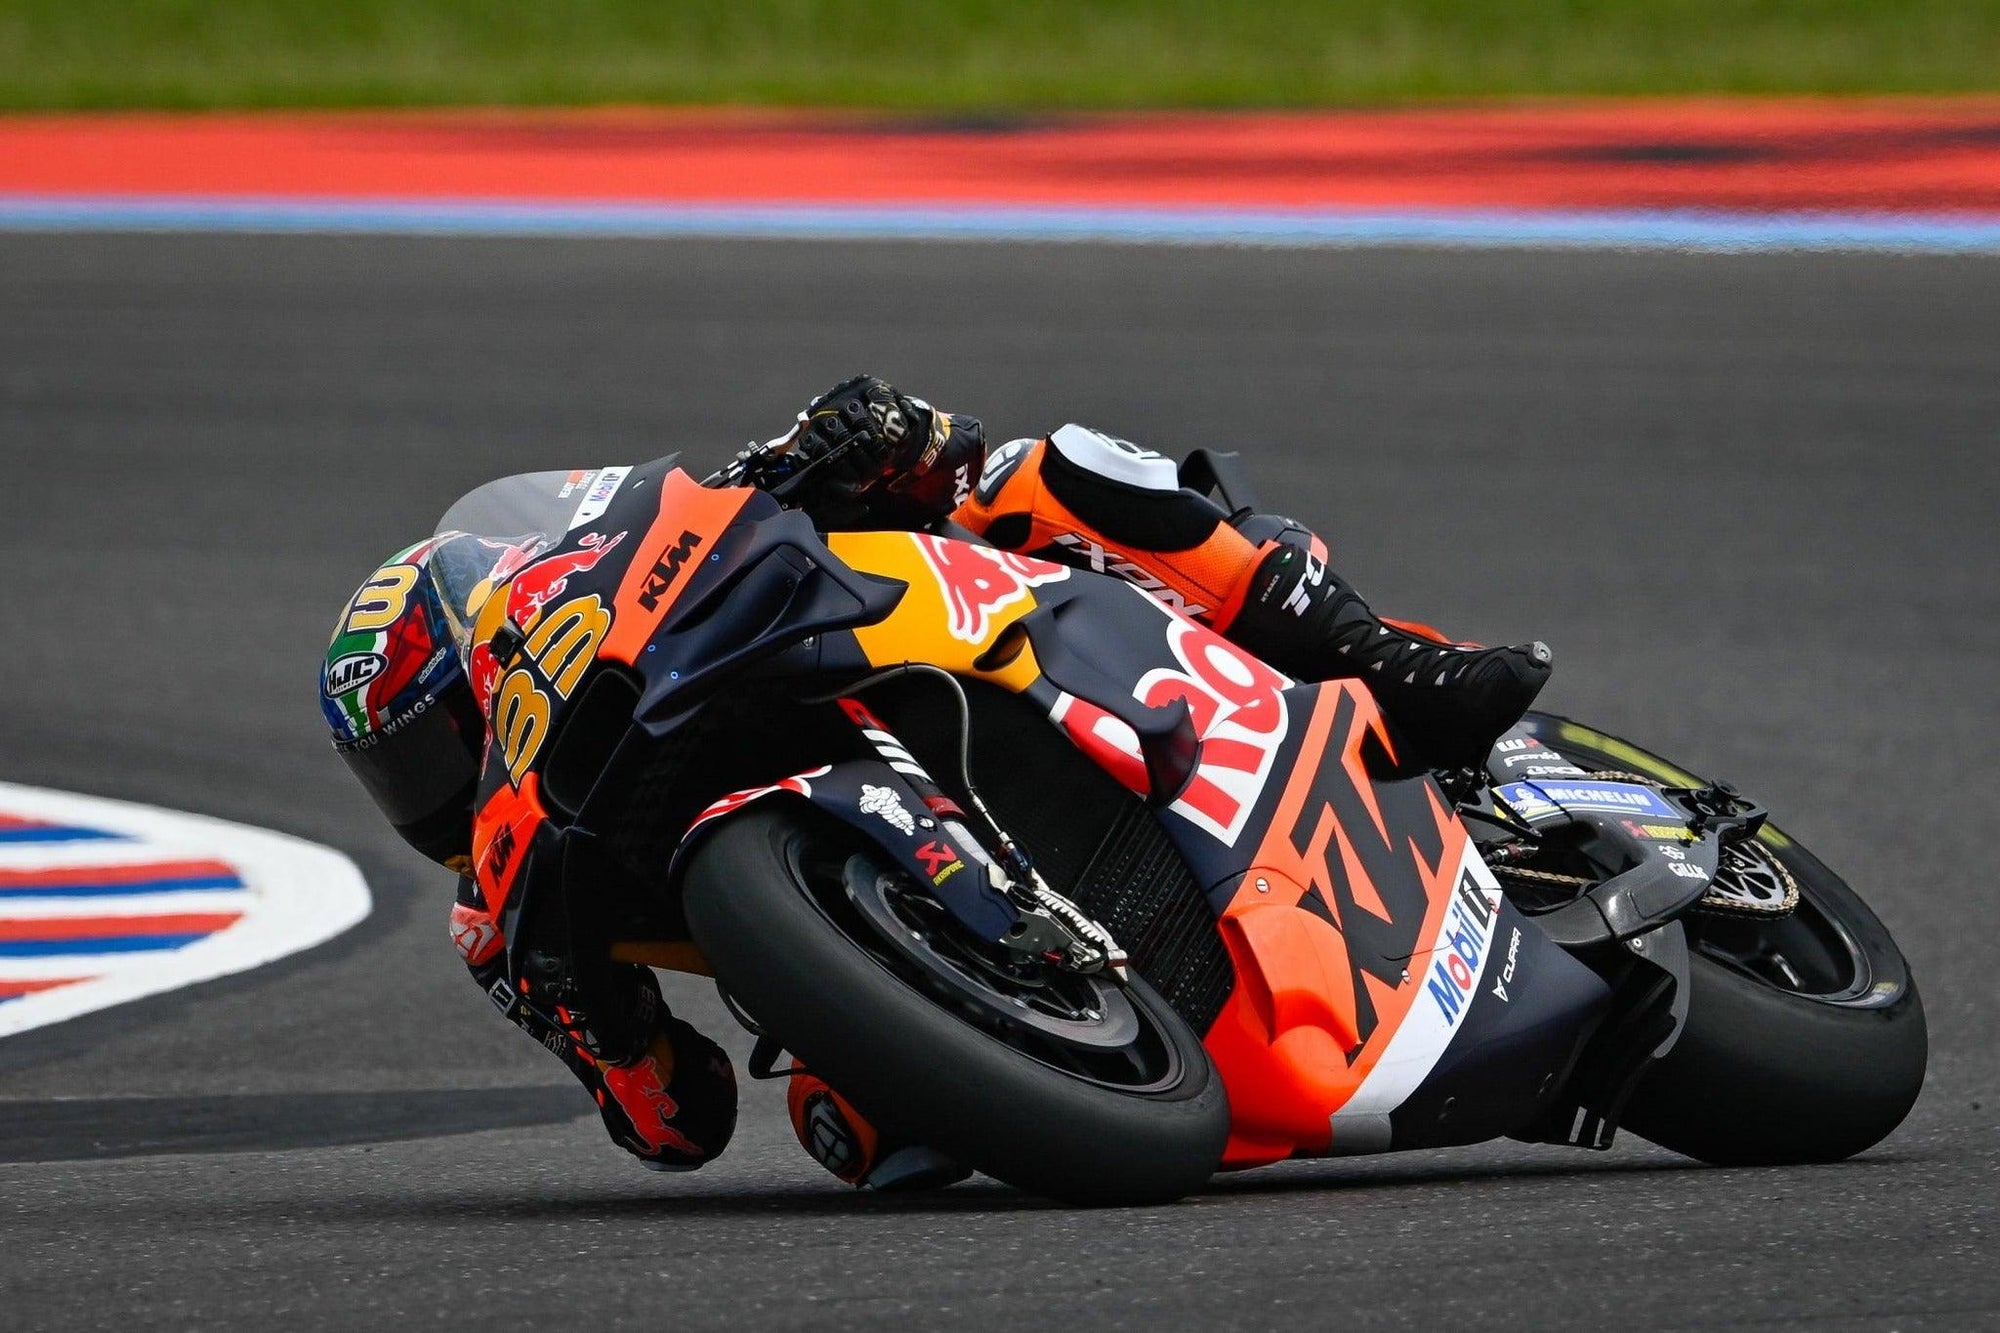 MotoGP Argentina: Brad Binder delivers a masterclass from P15 to win the Sprint